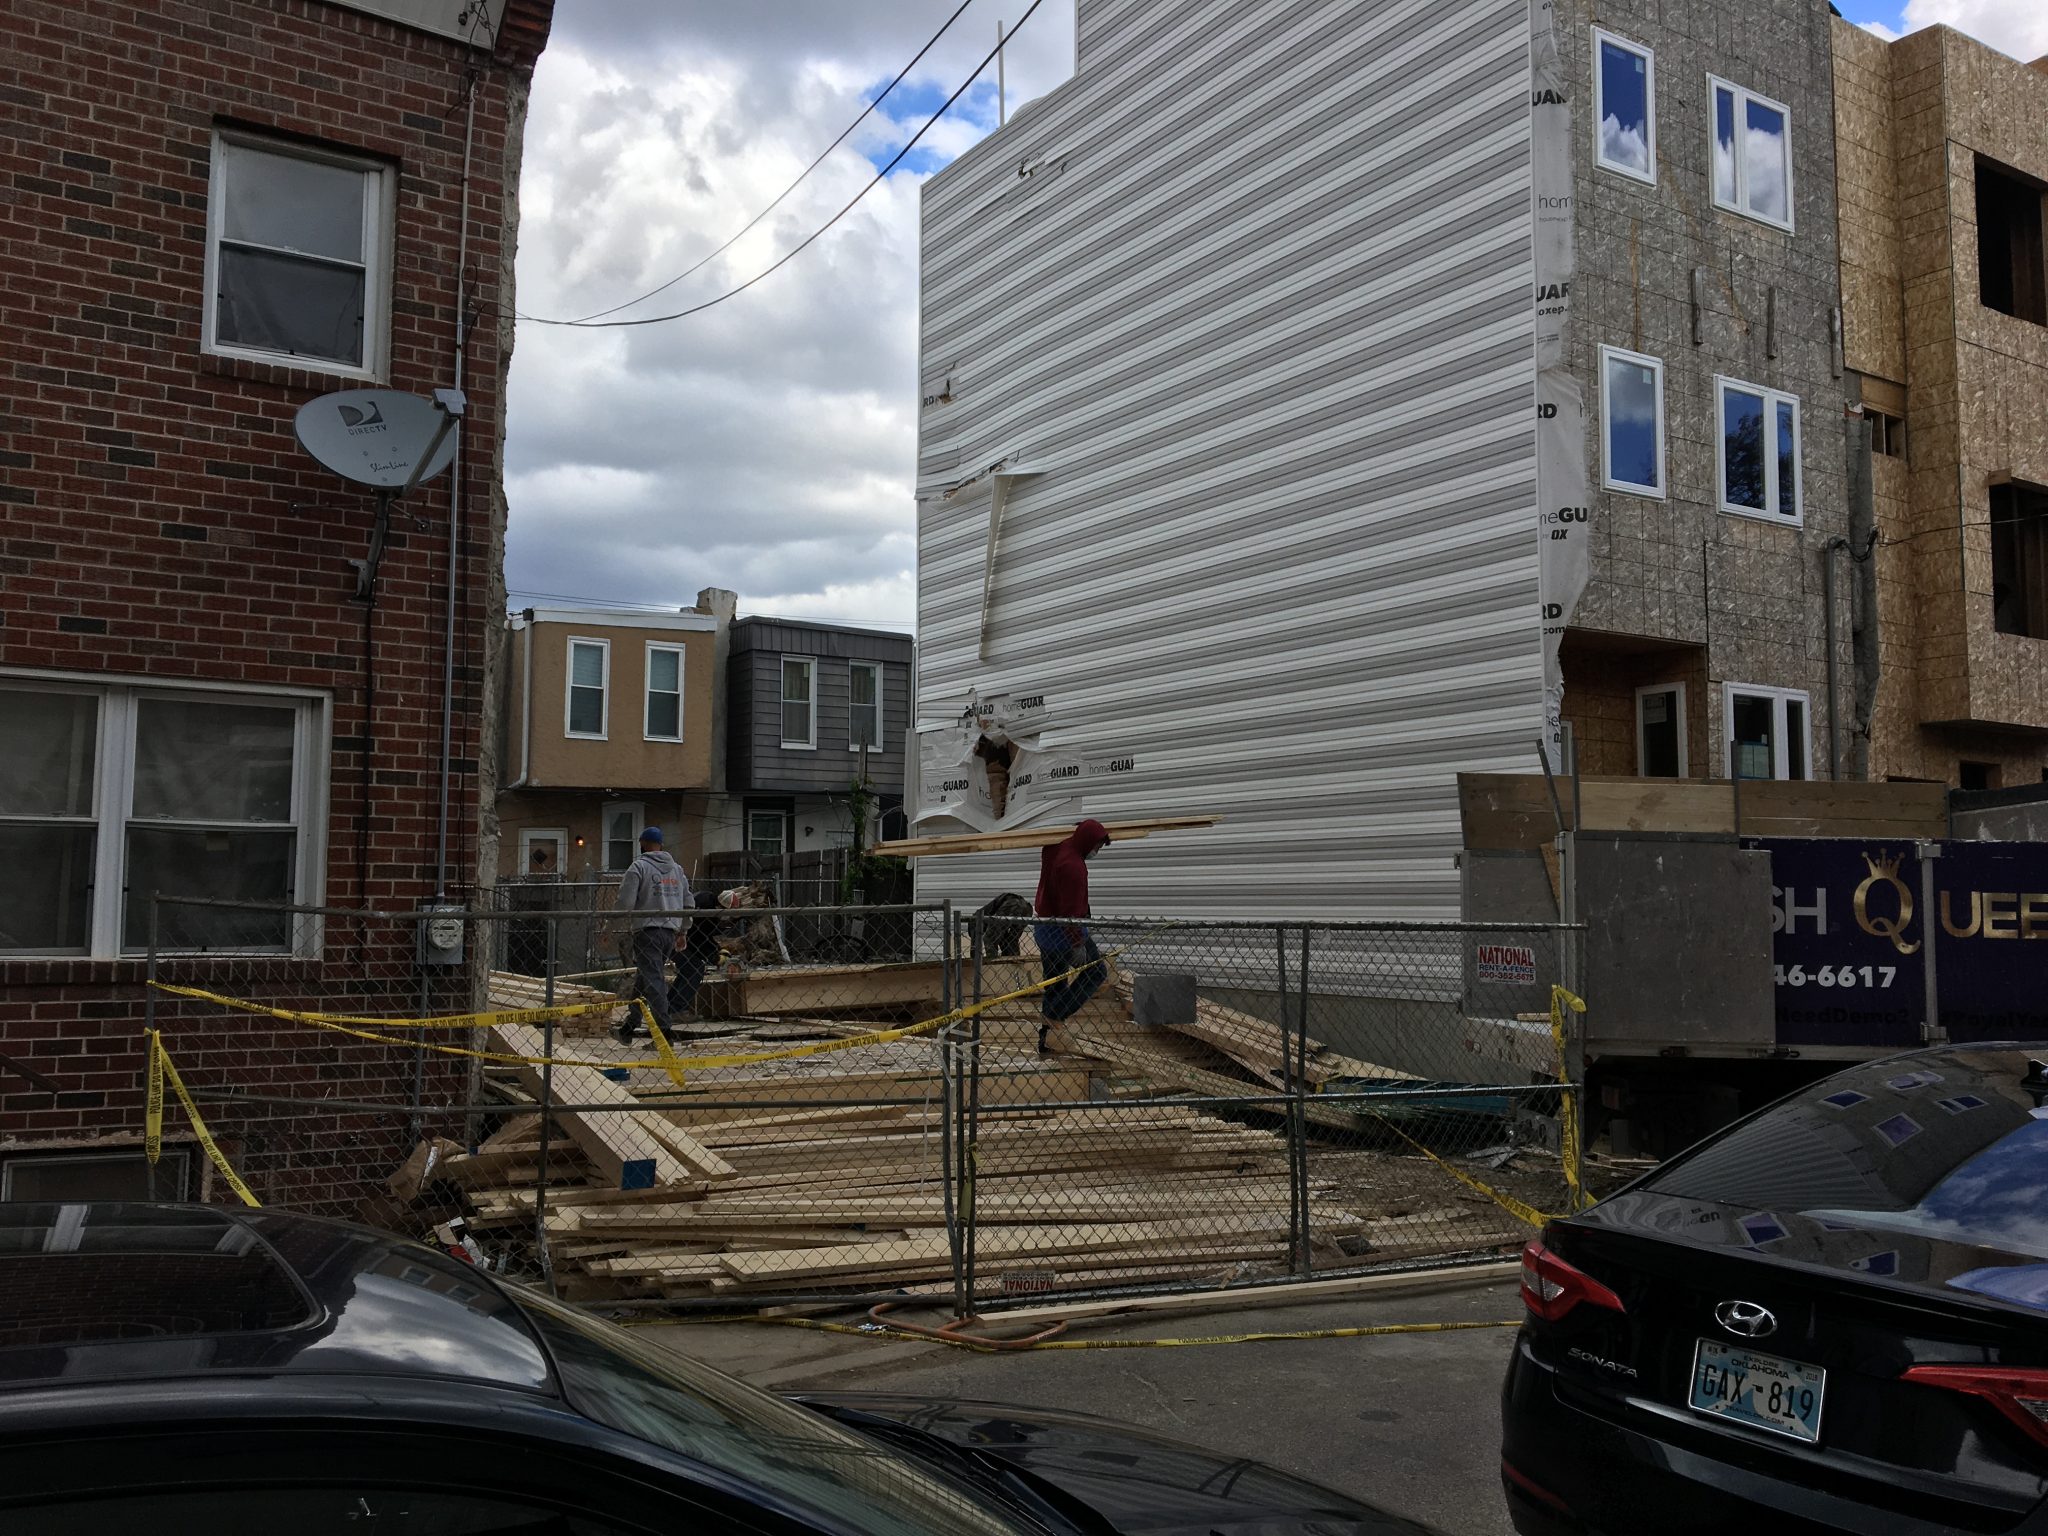 Contractor fined, has license suspended after Point Breeze house collapse in May